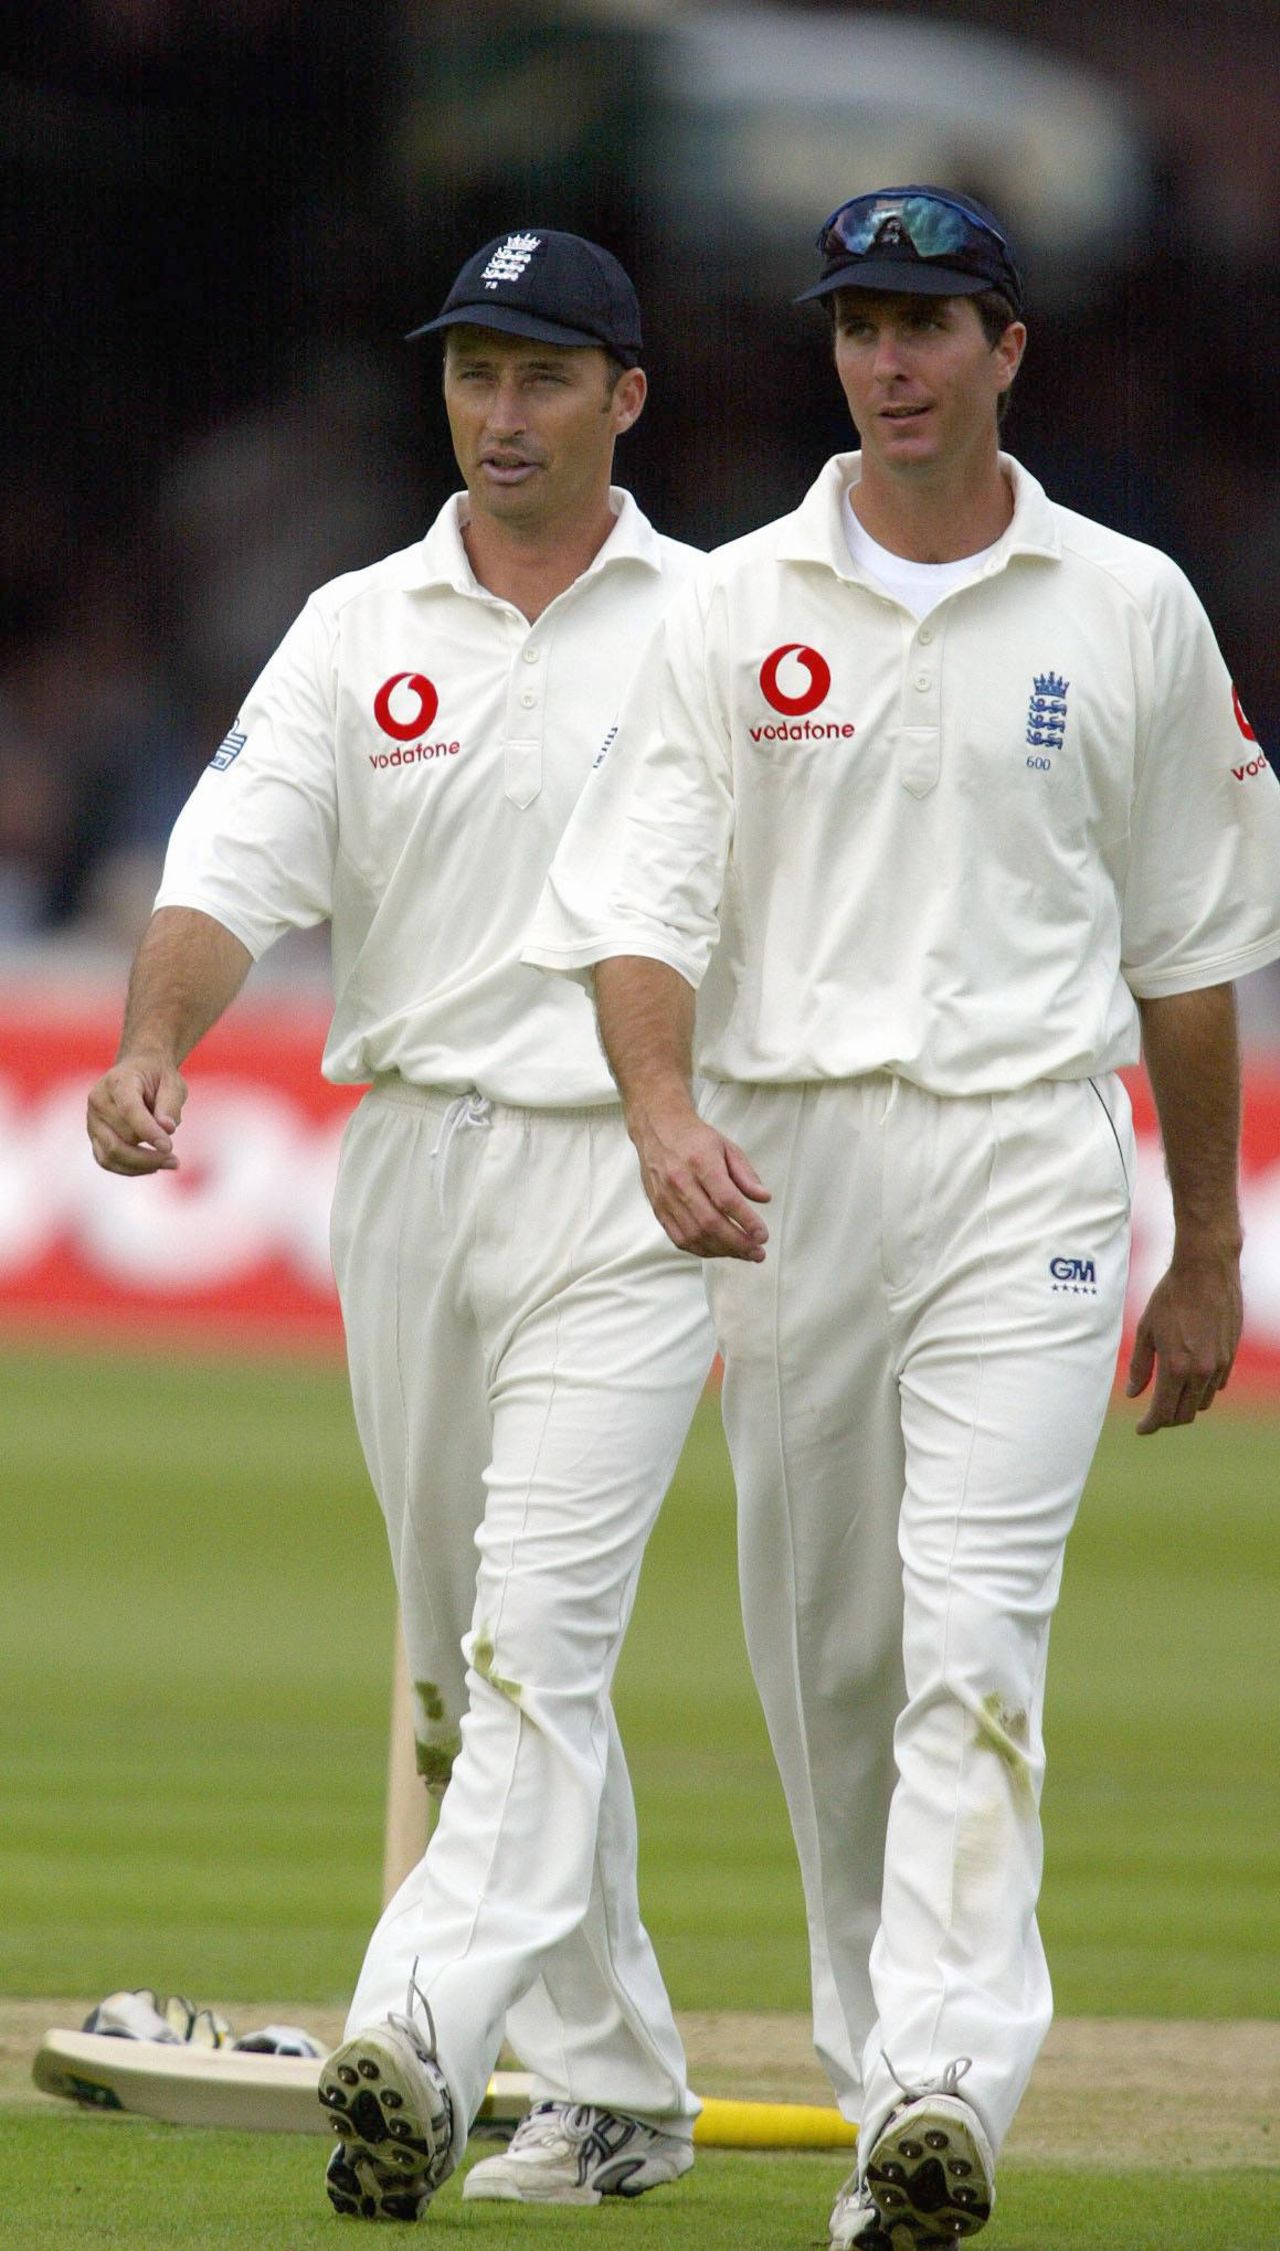 Michael Vaughan walks ahead of Nasser Hussain, day 1, 2nd npower Test, England v South Africa, Lord's, London, England, July 31, 2003